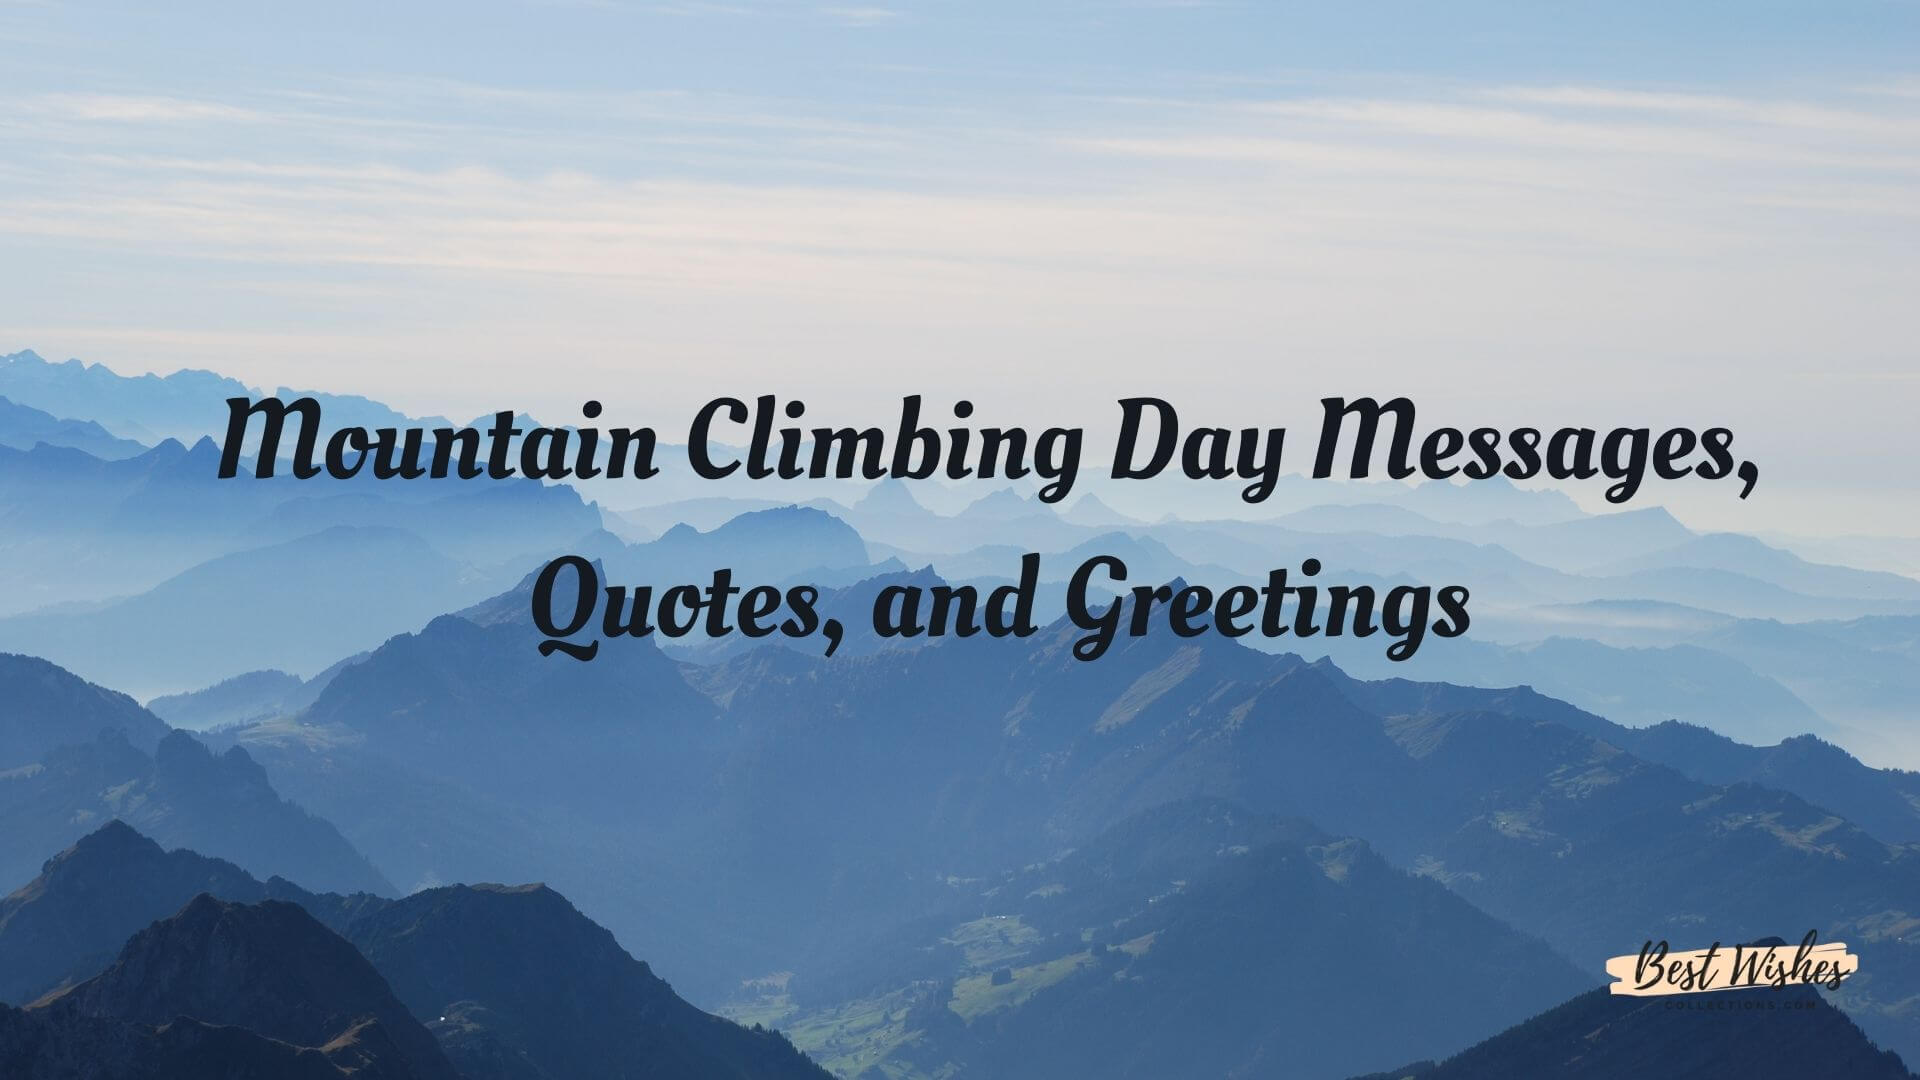 Mountain Climbing Day Messages, Quotes & Greetings Best Wishes